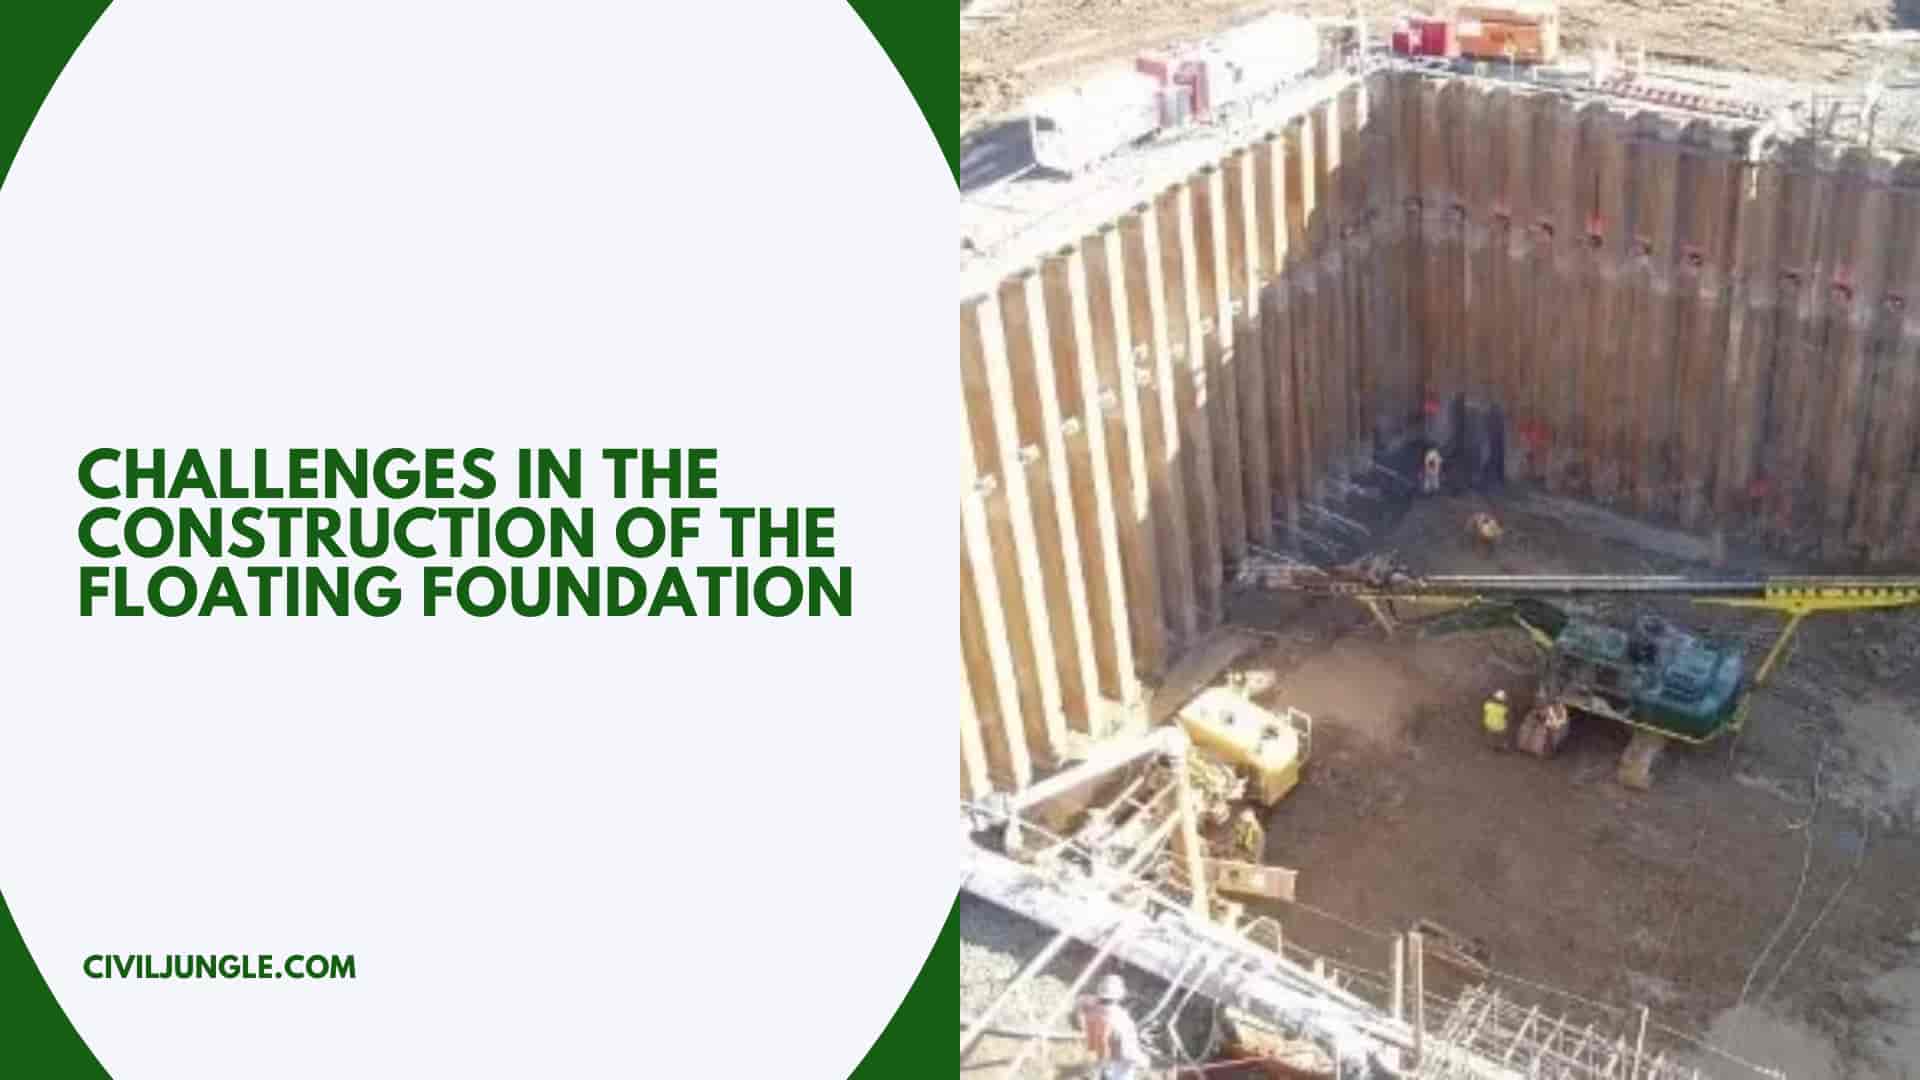 Challenges in the Construction of the Floating Foundation